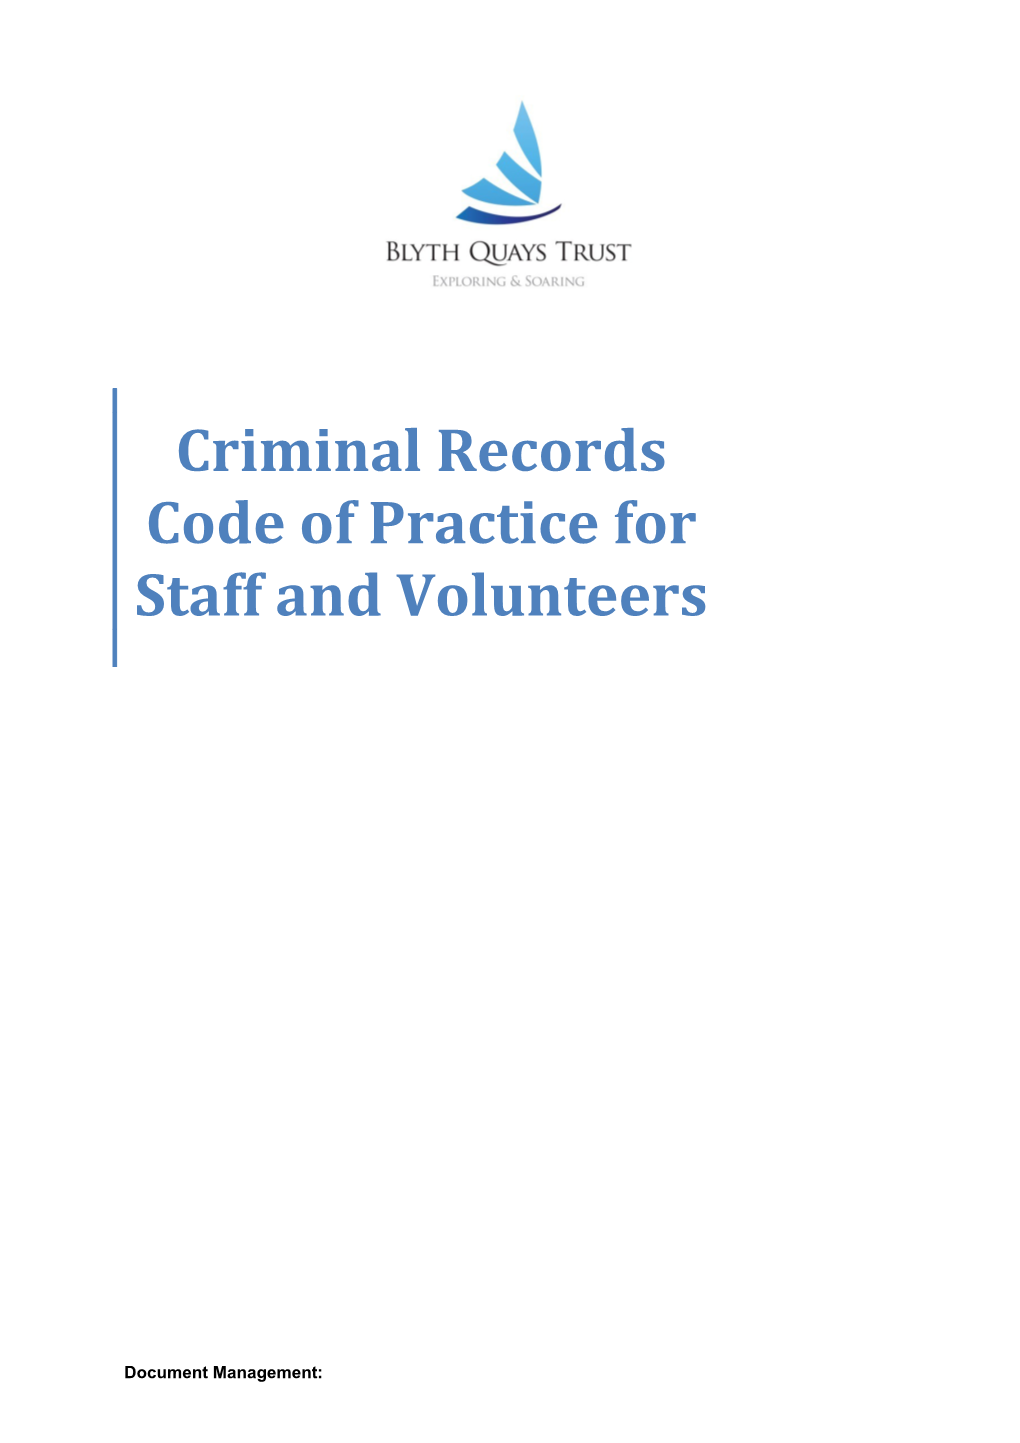 Criminal Records Code of Practice